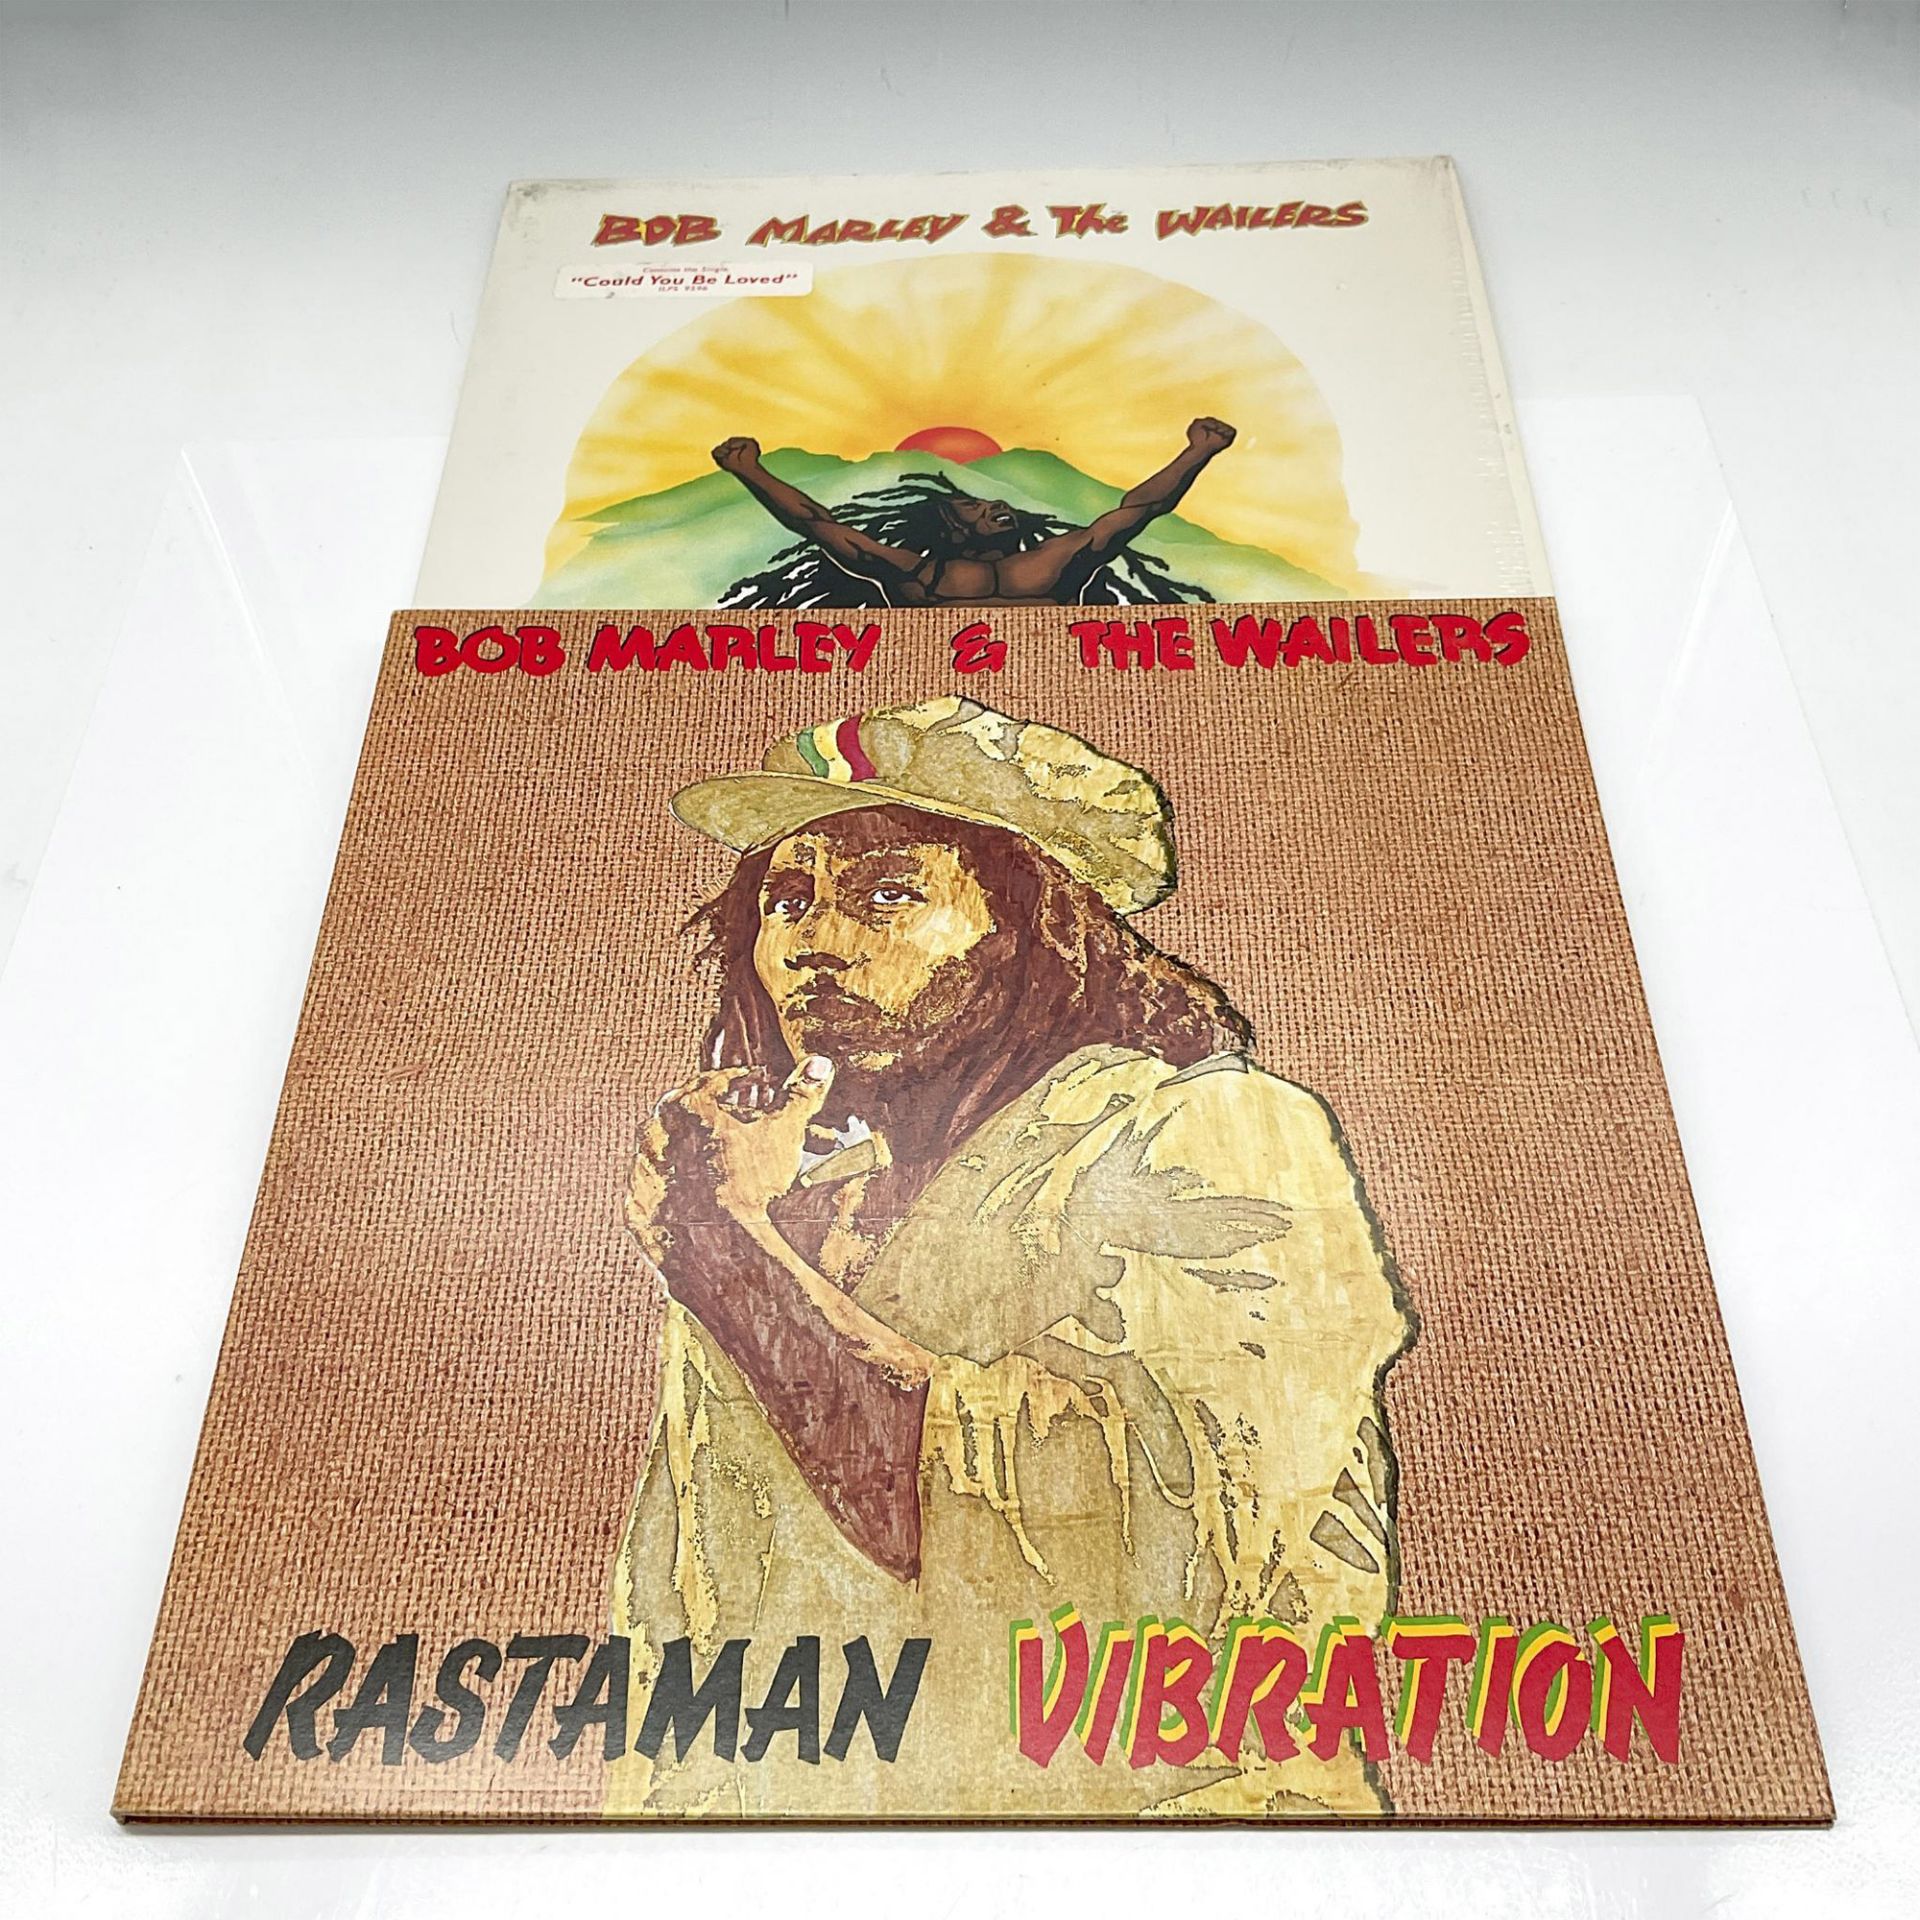 2pc Bob Marley and the Wailers Vinyl LPs